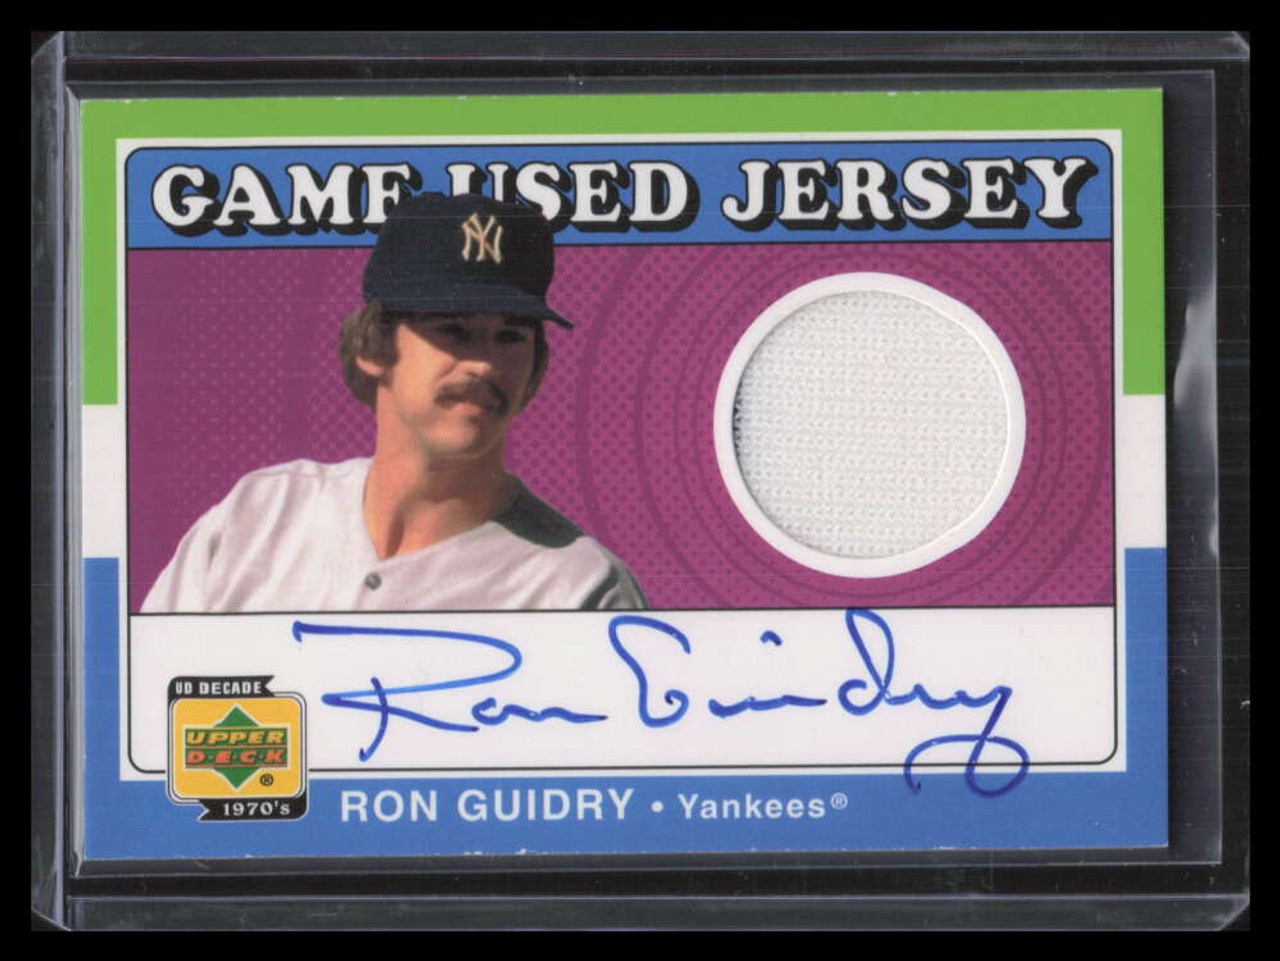 2001 Upper Deck Decade 1970's Game Jersey Autograph SJRG Ron Guidry Jersey  Auto